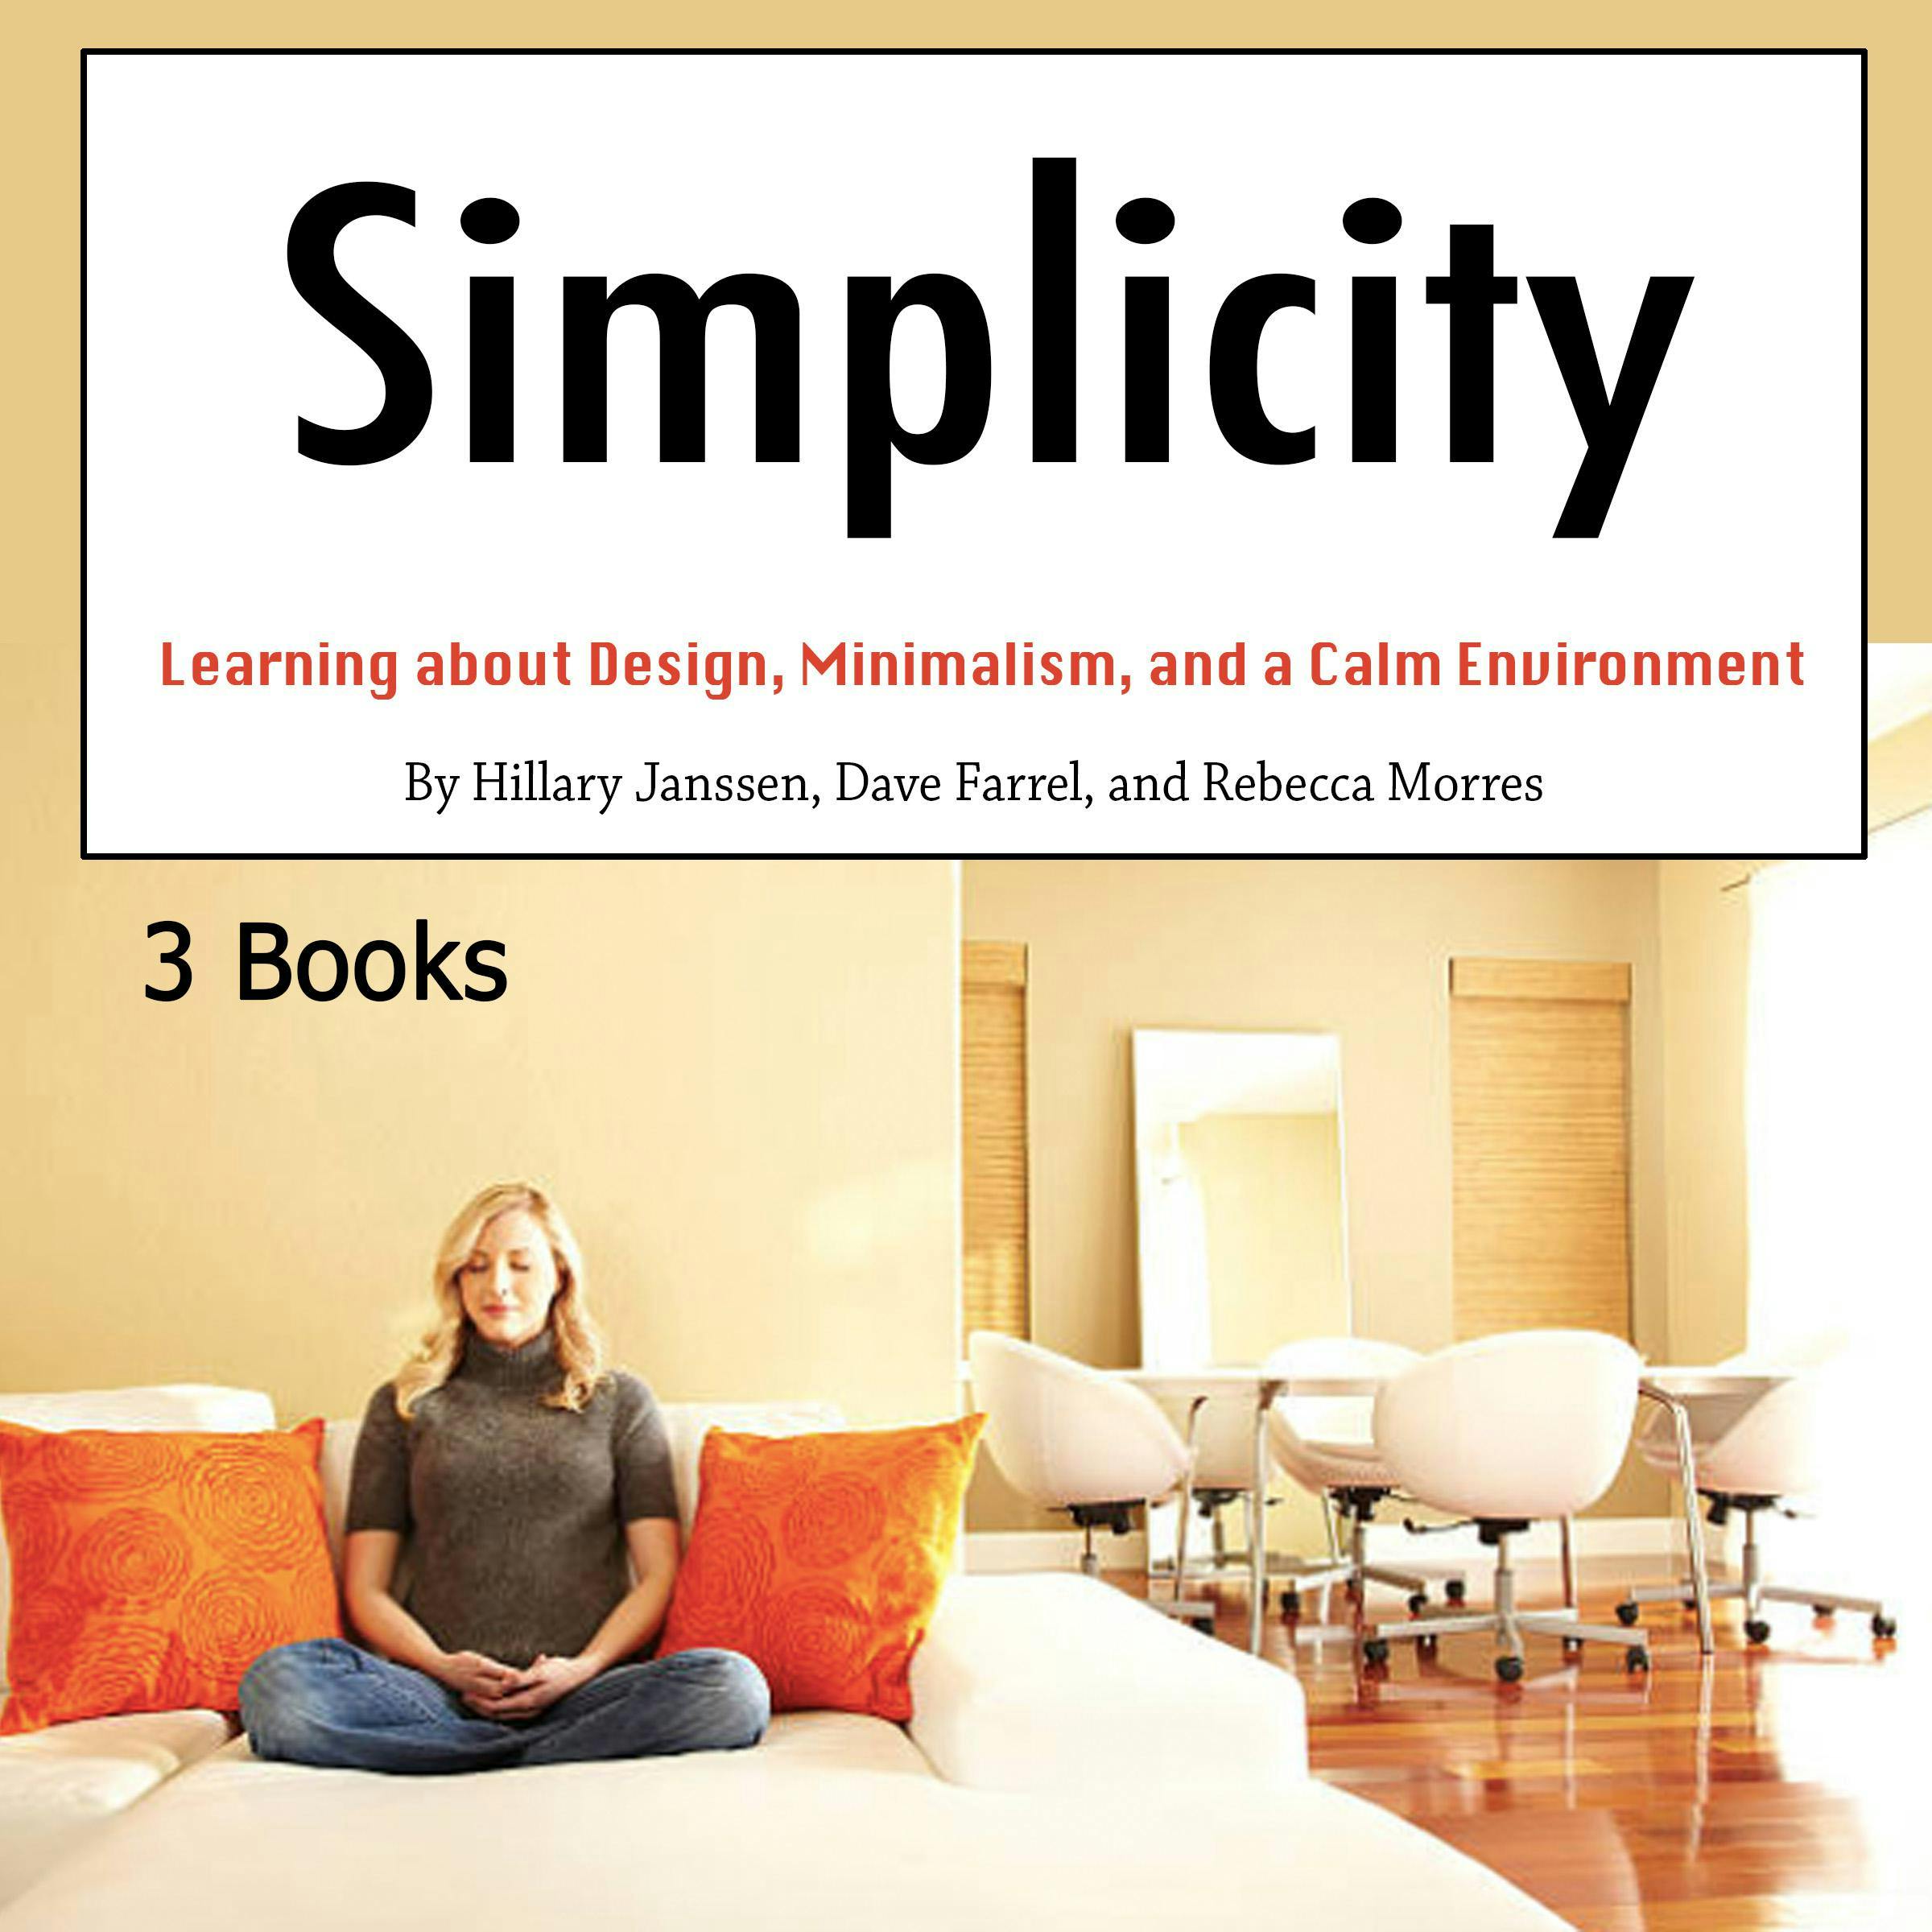 Simplicity: Learning about Design, Minimalism, and a Calm Environment - Rebecca Morres, Hillary Janssen, Dave Farrel